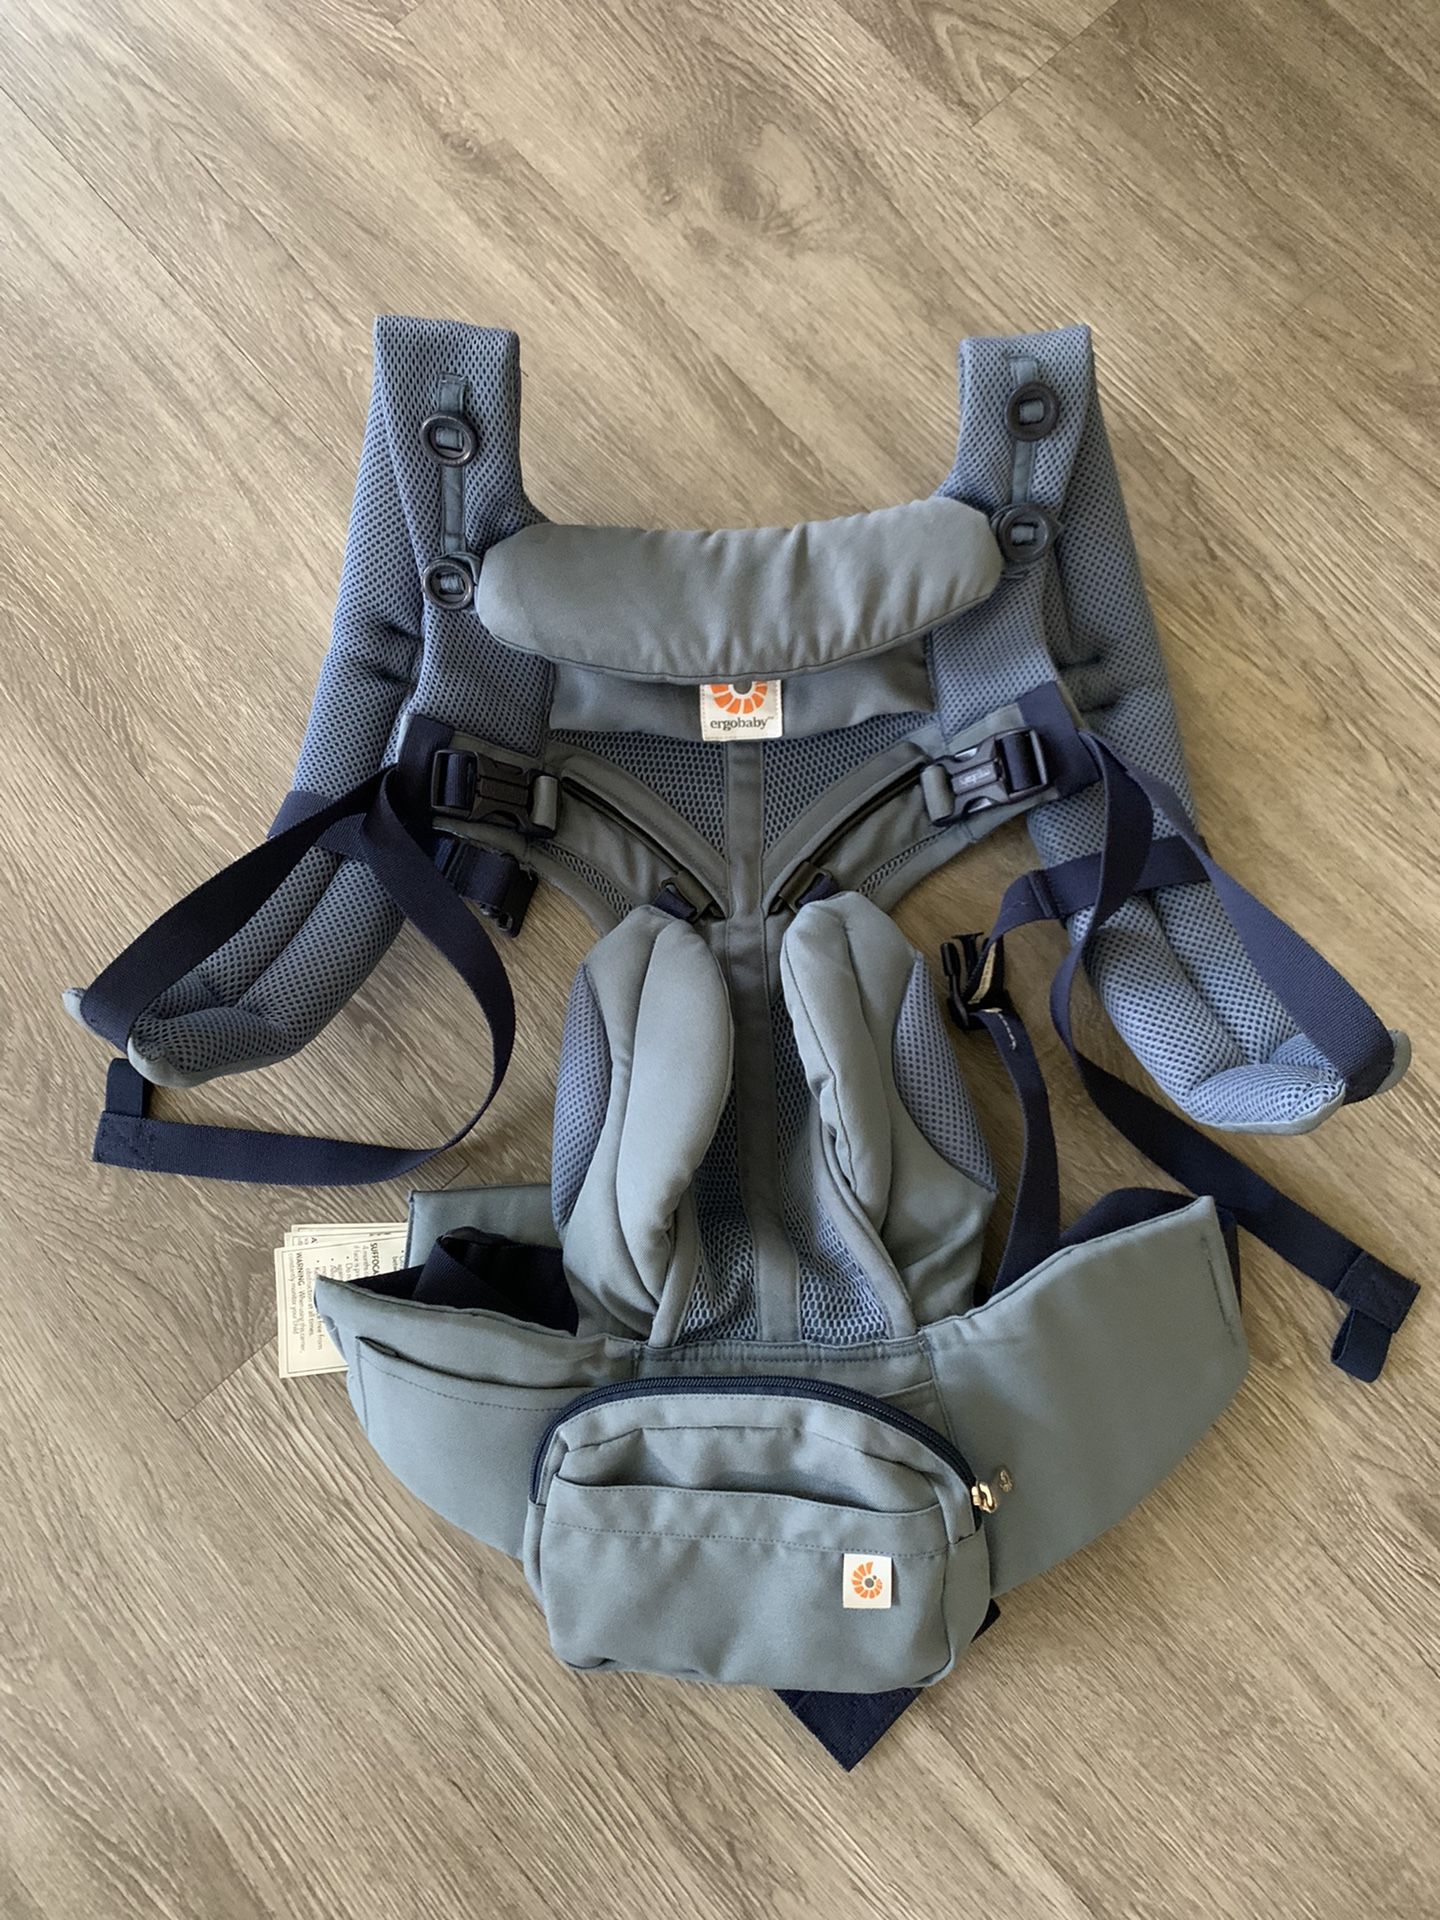 ergobaby Omni 360 Cool Air Baby Carrier